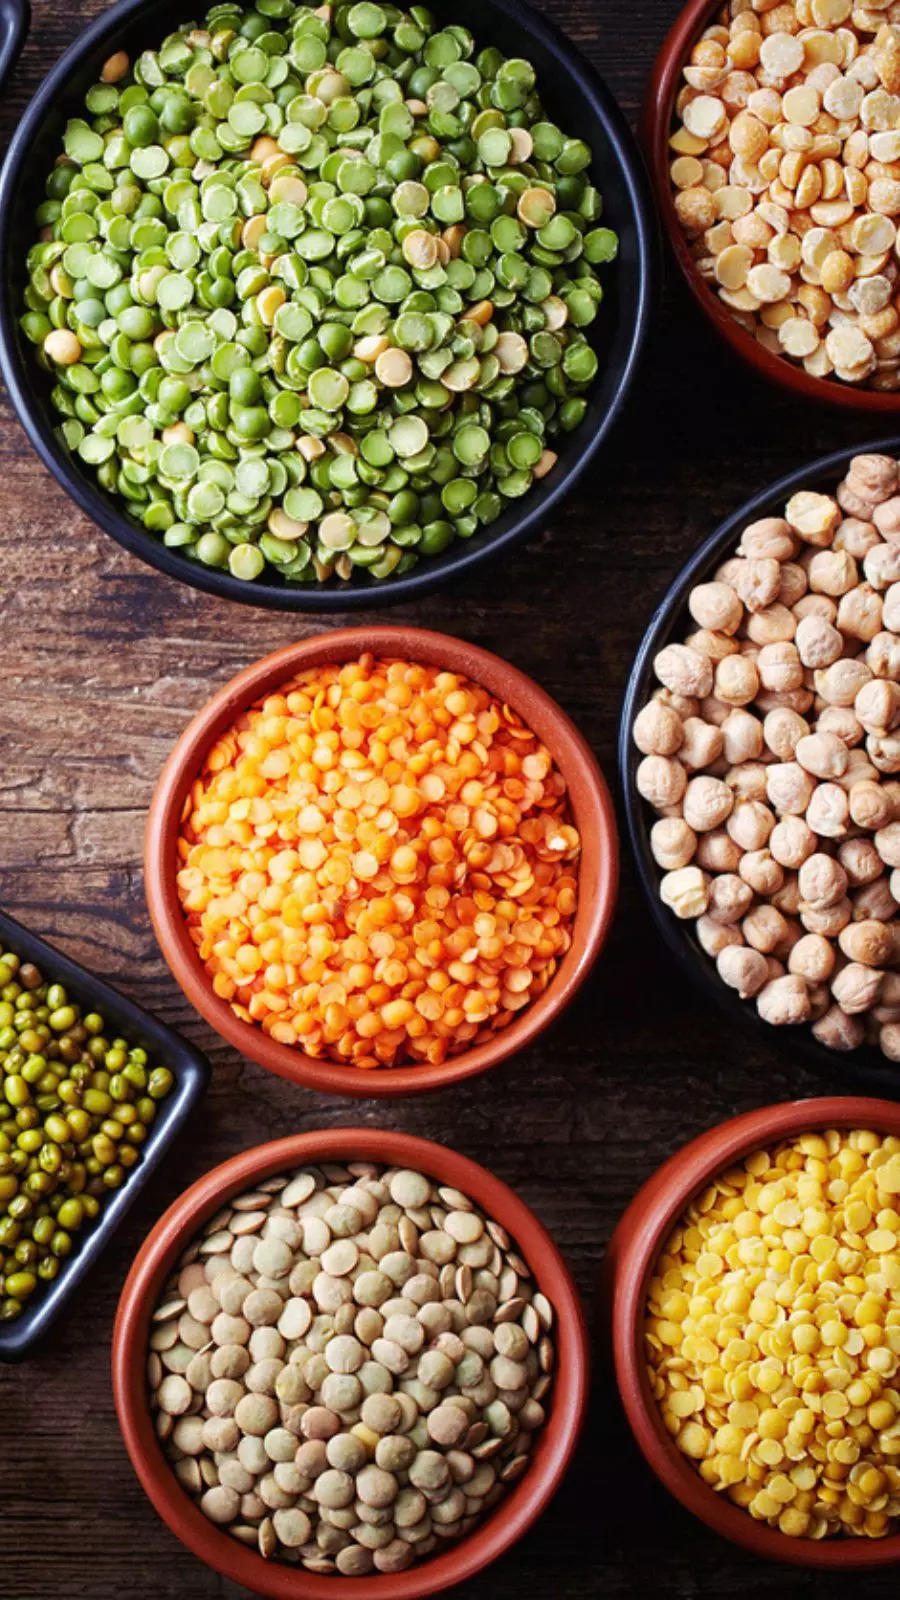 10 most protein-rich plant based foods 